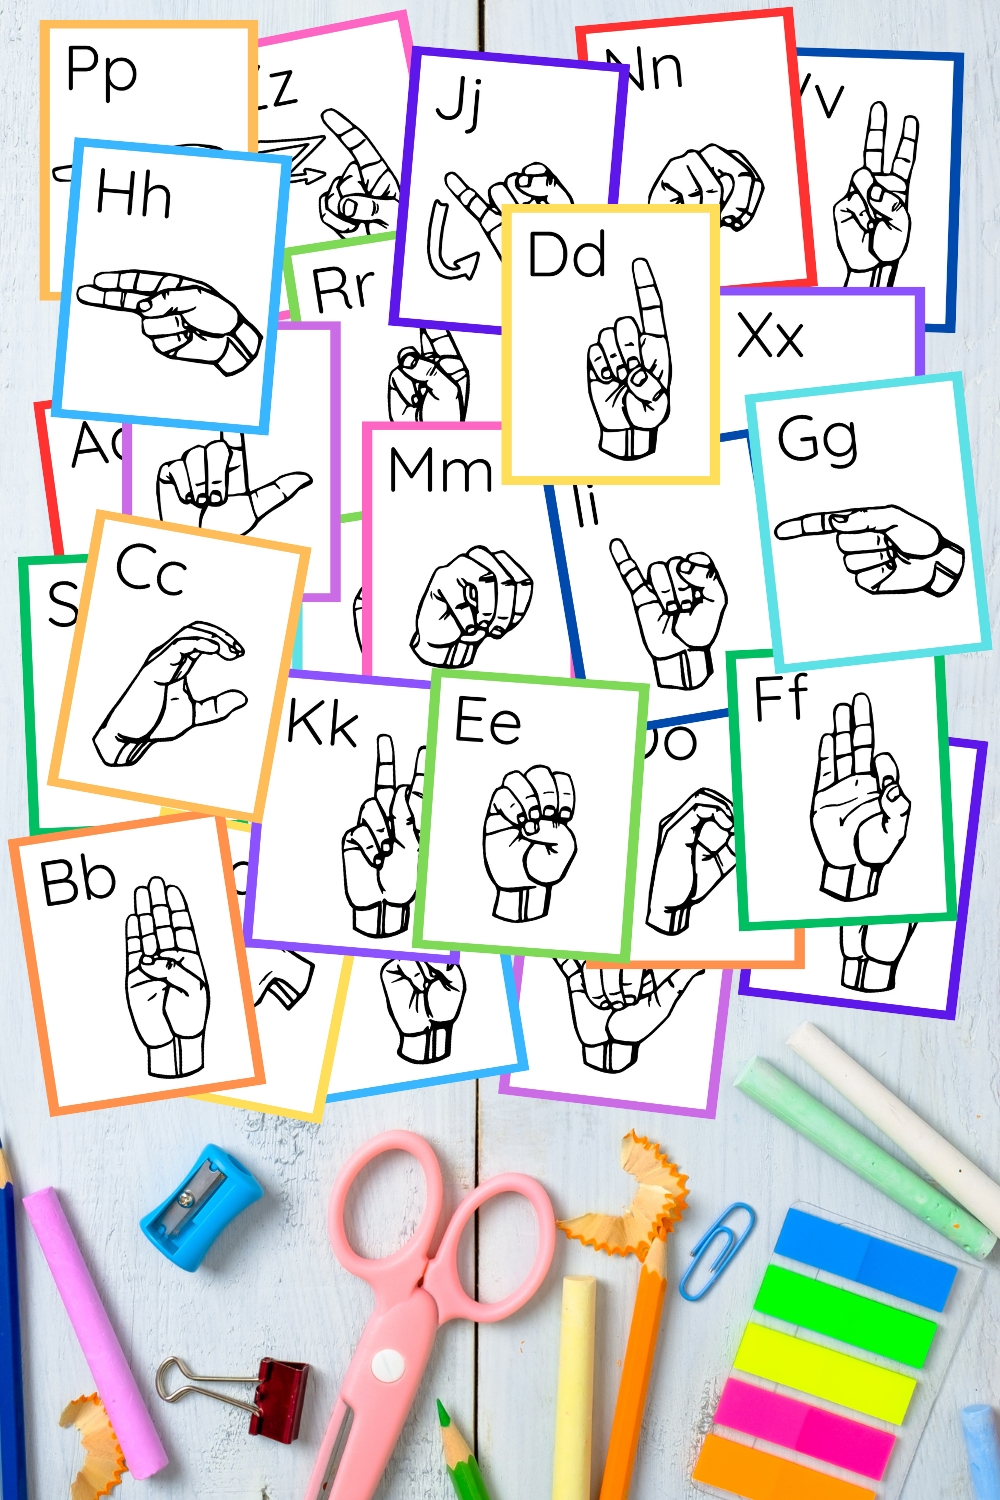 Free Printable ASL Alphabet Flashcards perfect for teaching the alphabet in American Sign Language.